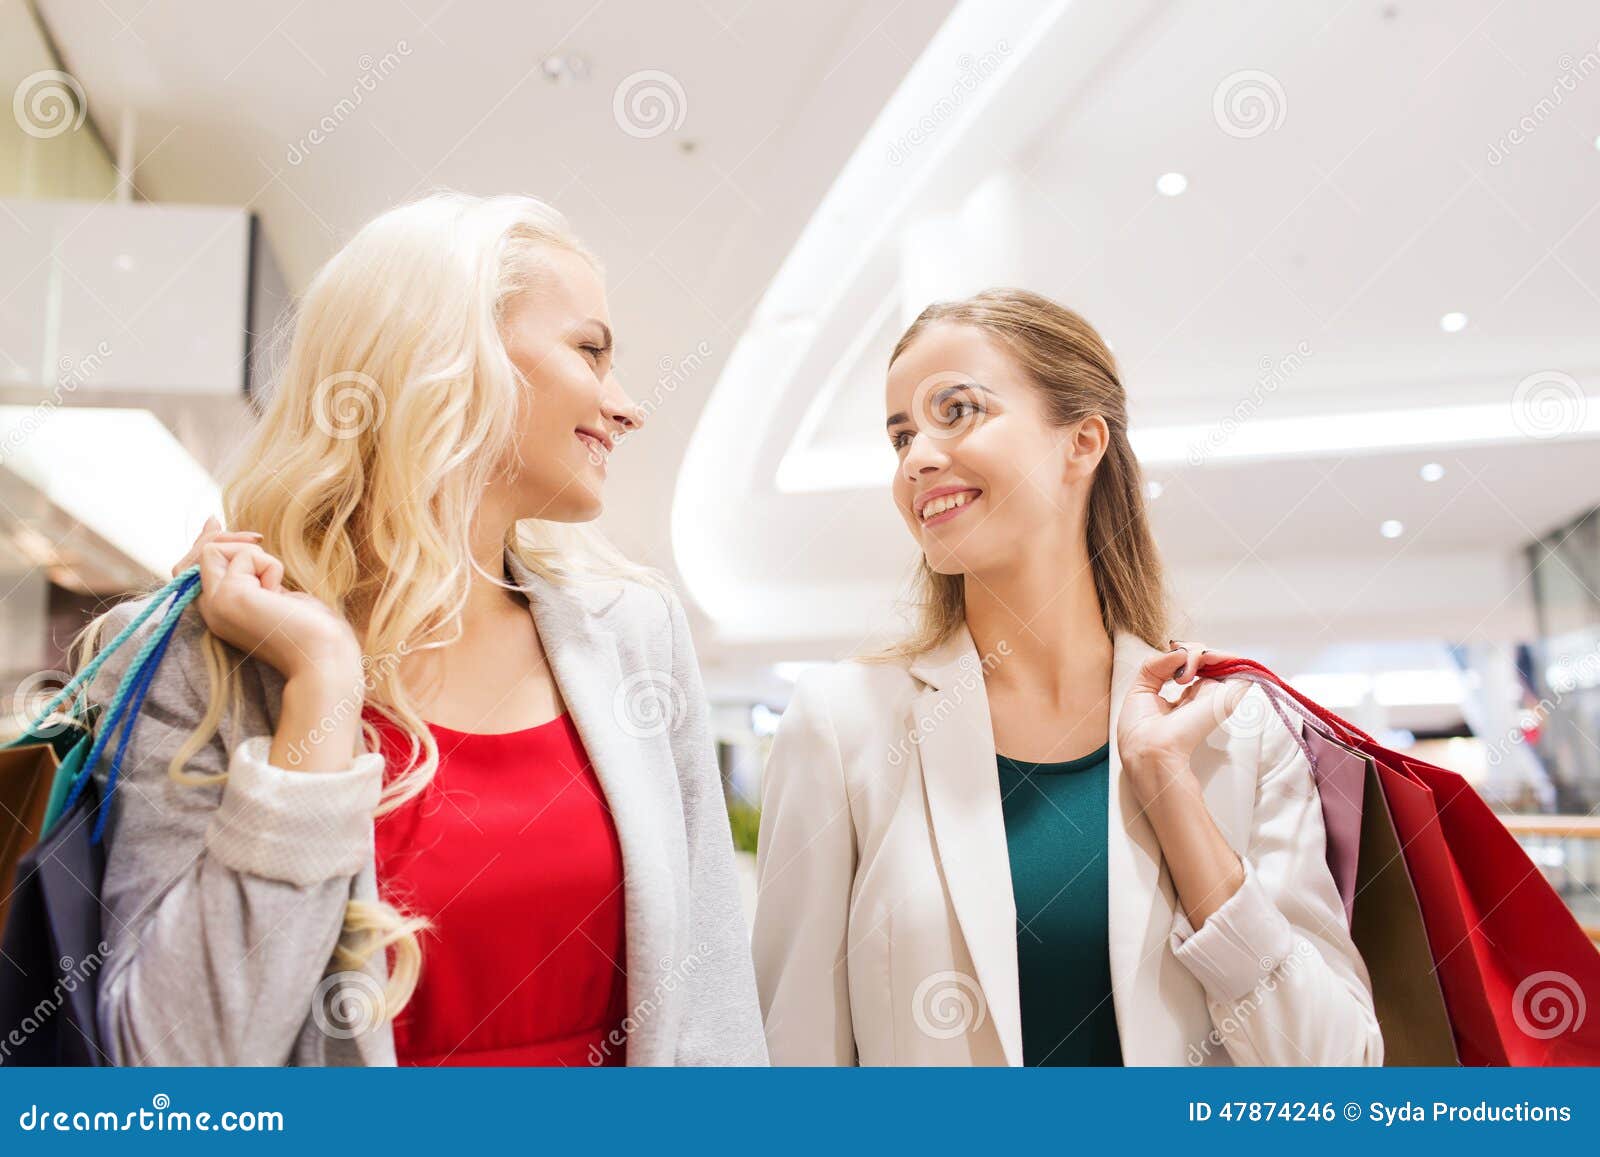 Happy Young Women with Shopping Bags in Mall Stock Photo - Image of ...